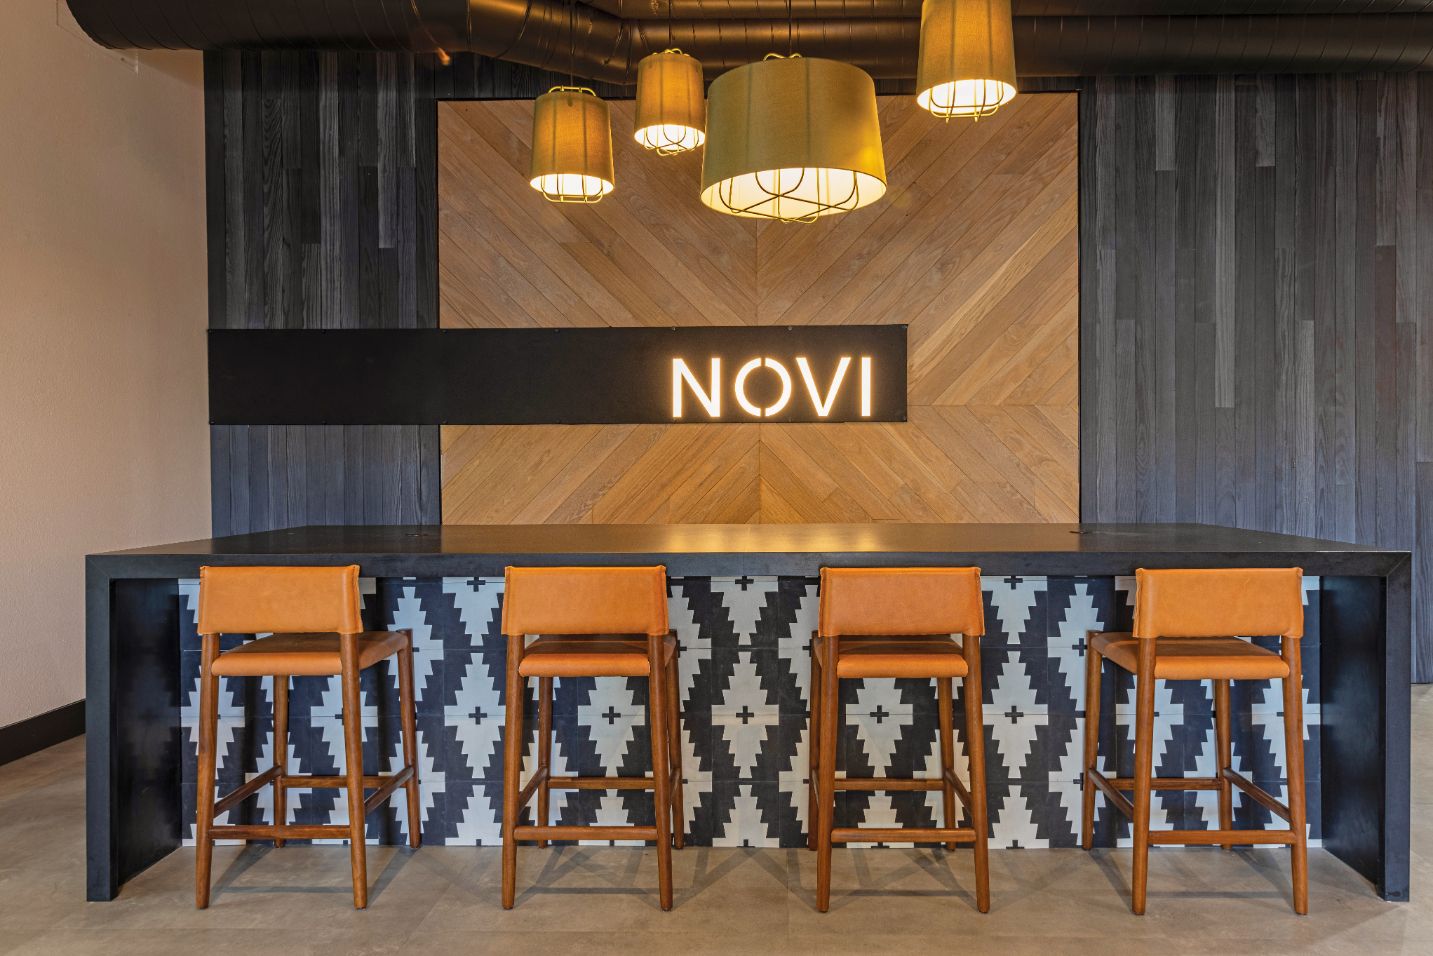 indoor clubhouse with black serving and and wooden backdrop, light up Novi logo sign